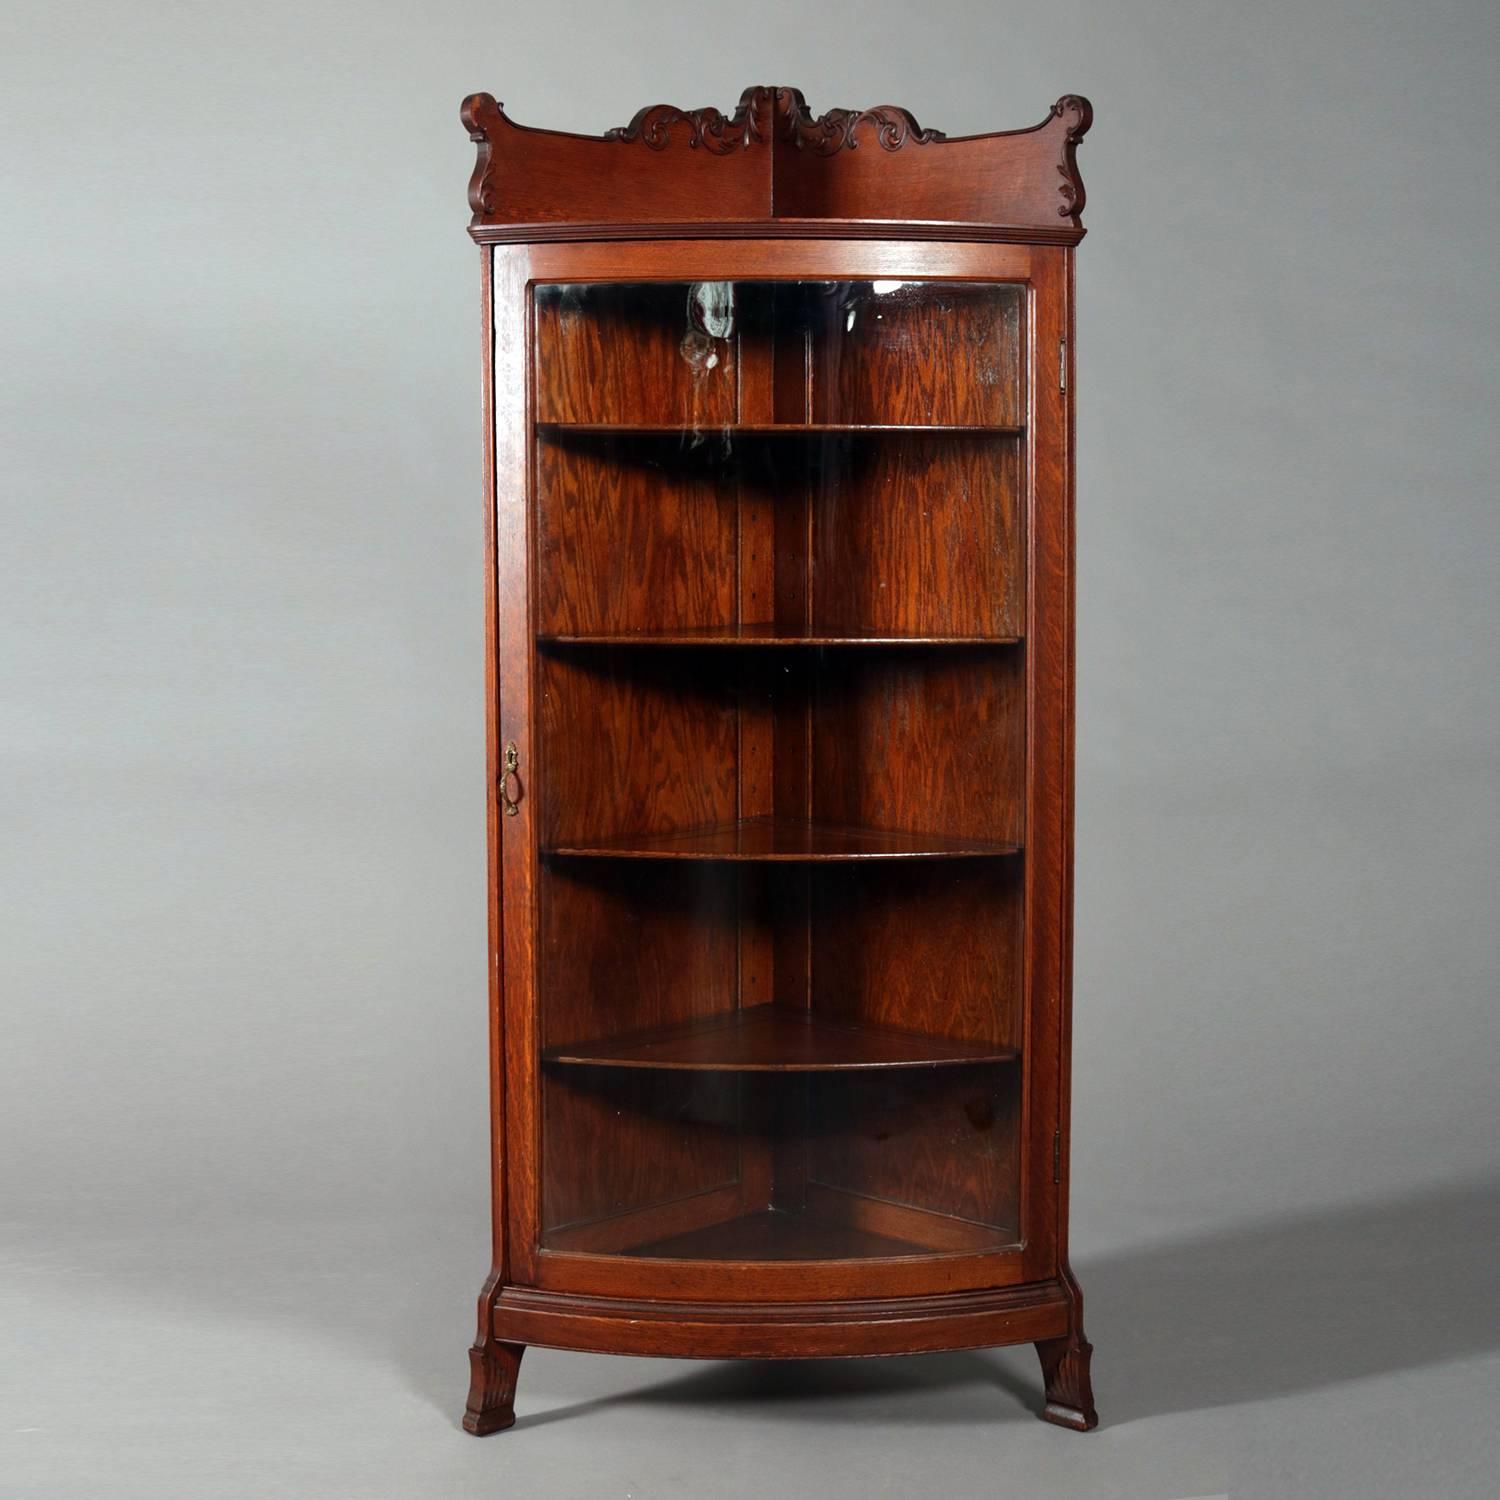 Antique R. J. Horner School cared oak corner china cabinet features rinceaux scroll and foliate backsplash, bow front glass door opening to adjustable shelf interior, circa 1910

Measures: 66